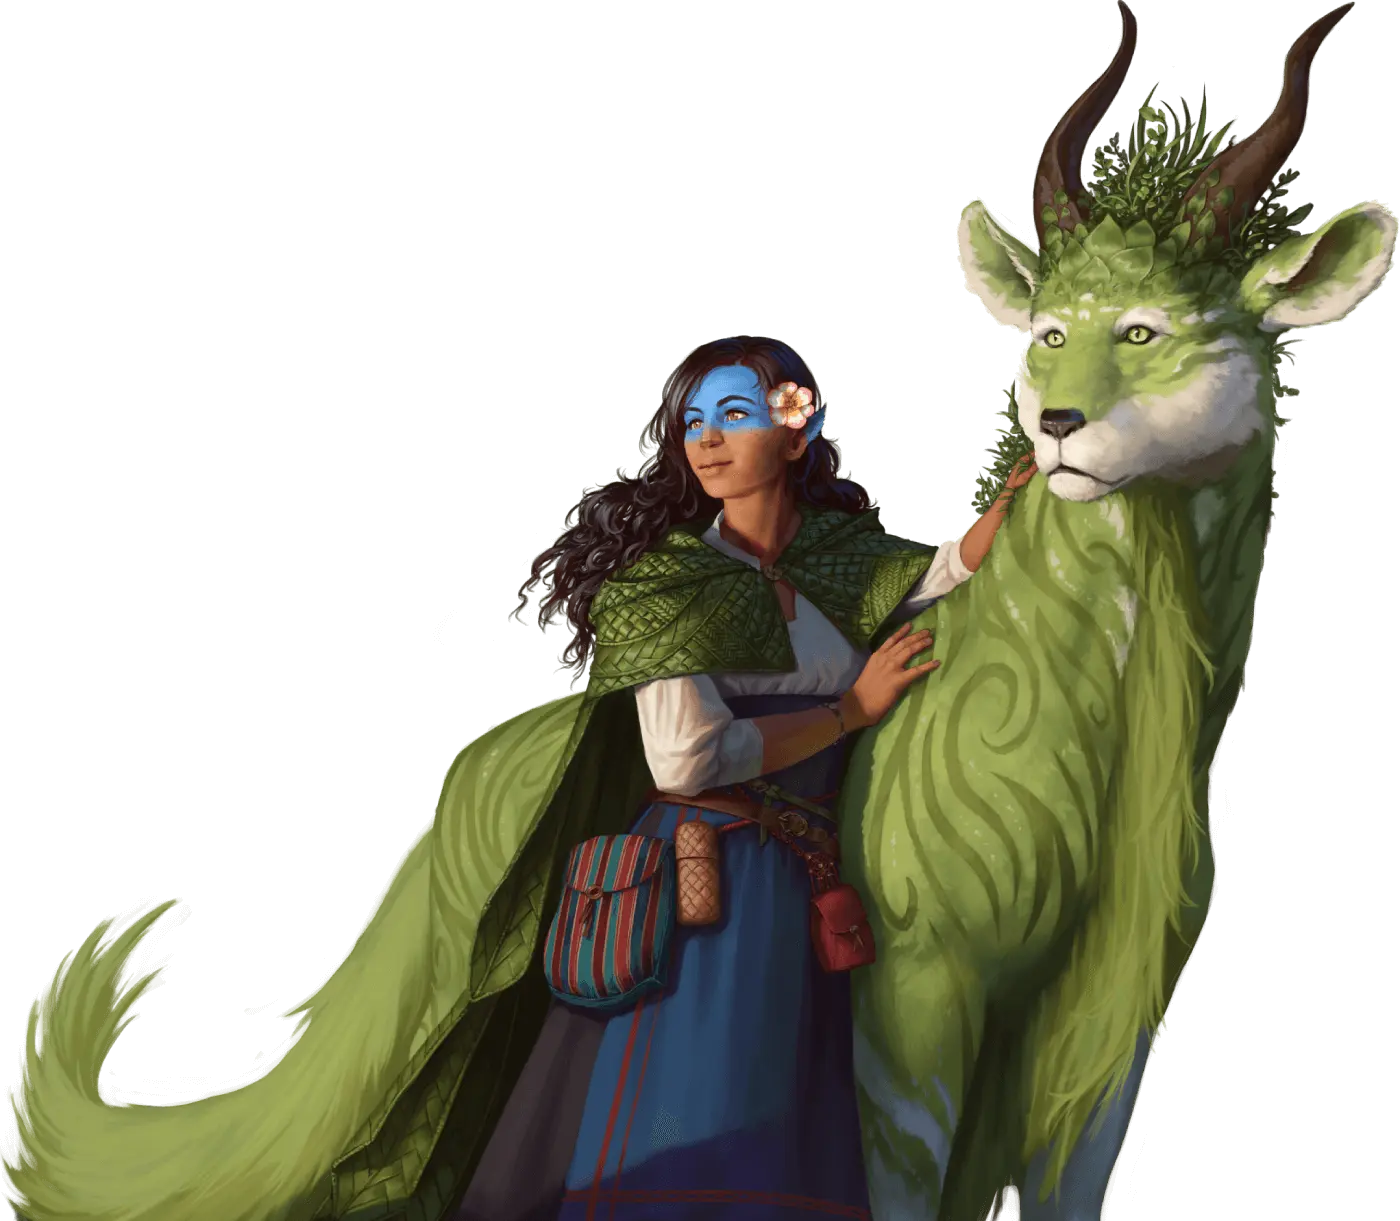 An illustration of a Longstrider woman with a flower in her hair standing next to a green-colored magical creature that looks like a majestic lion with horns and a grassy coat.